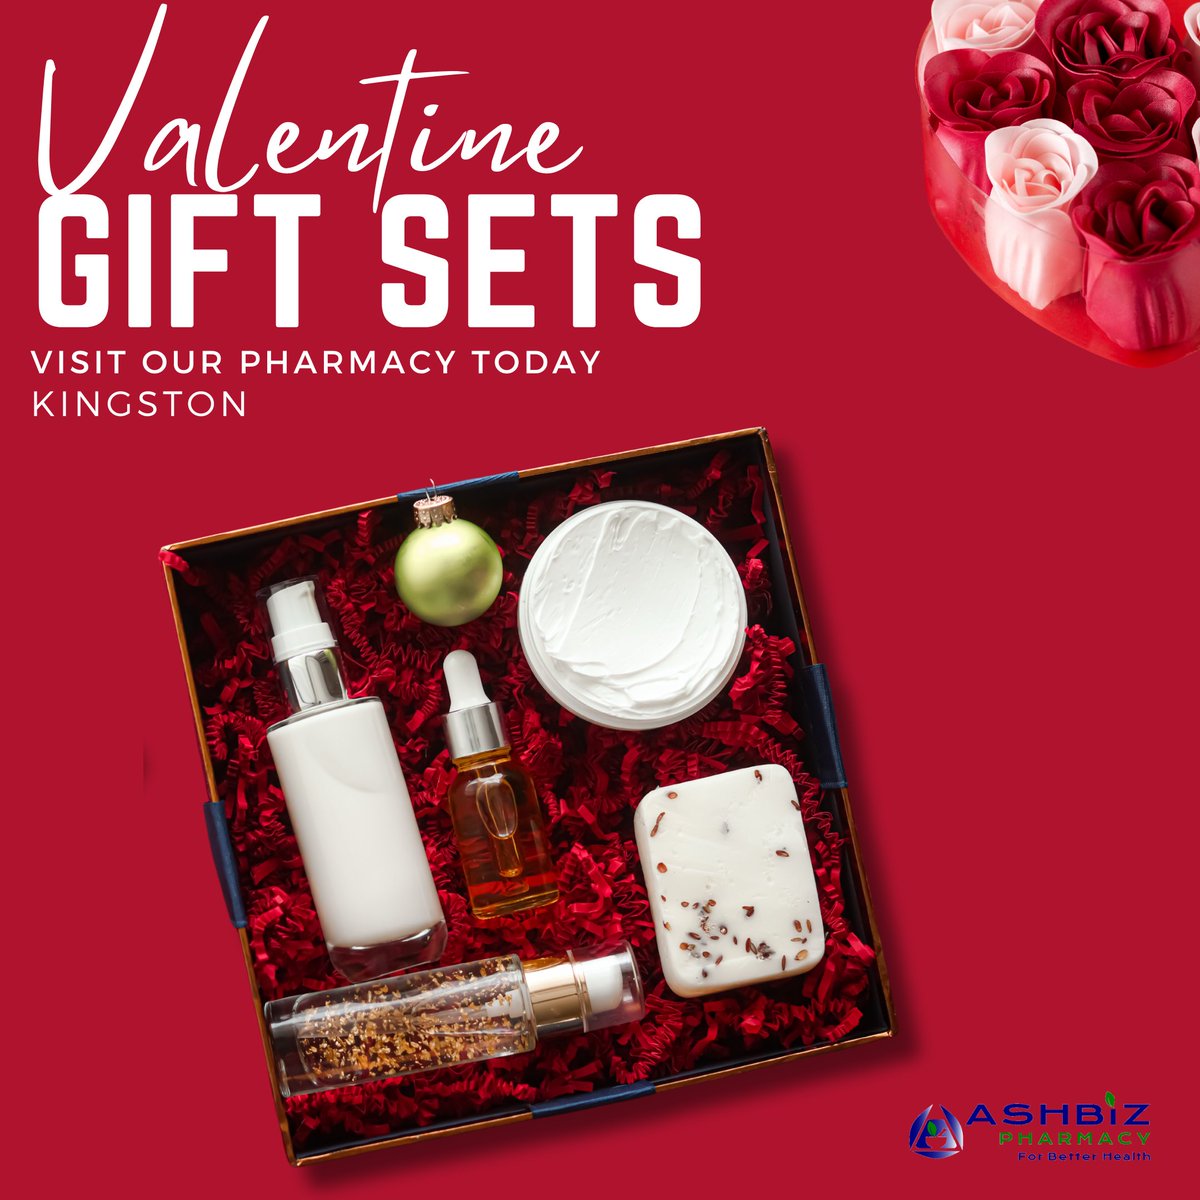 From romantic gestures to wellness treats, find the perfect gift to make this Valentine's Day unforgettable.

#ValentinesDay #GiftIdeasJamaica #AshBizPharmacy #giftsforhim #giftsforher #valentinesgifts